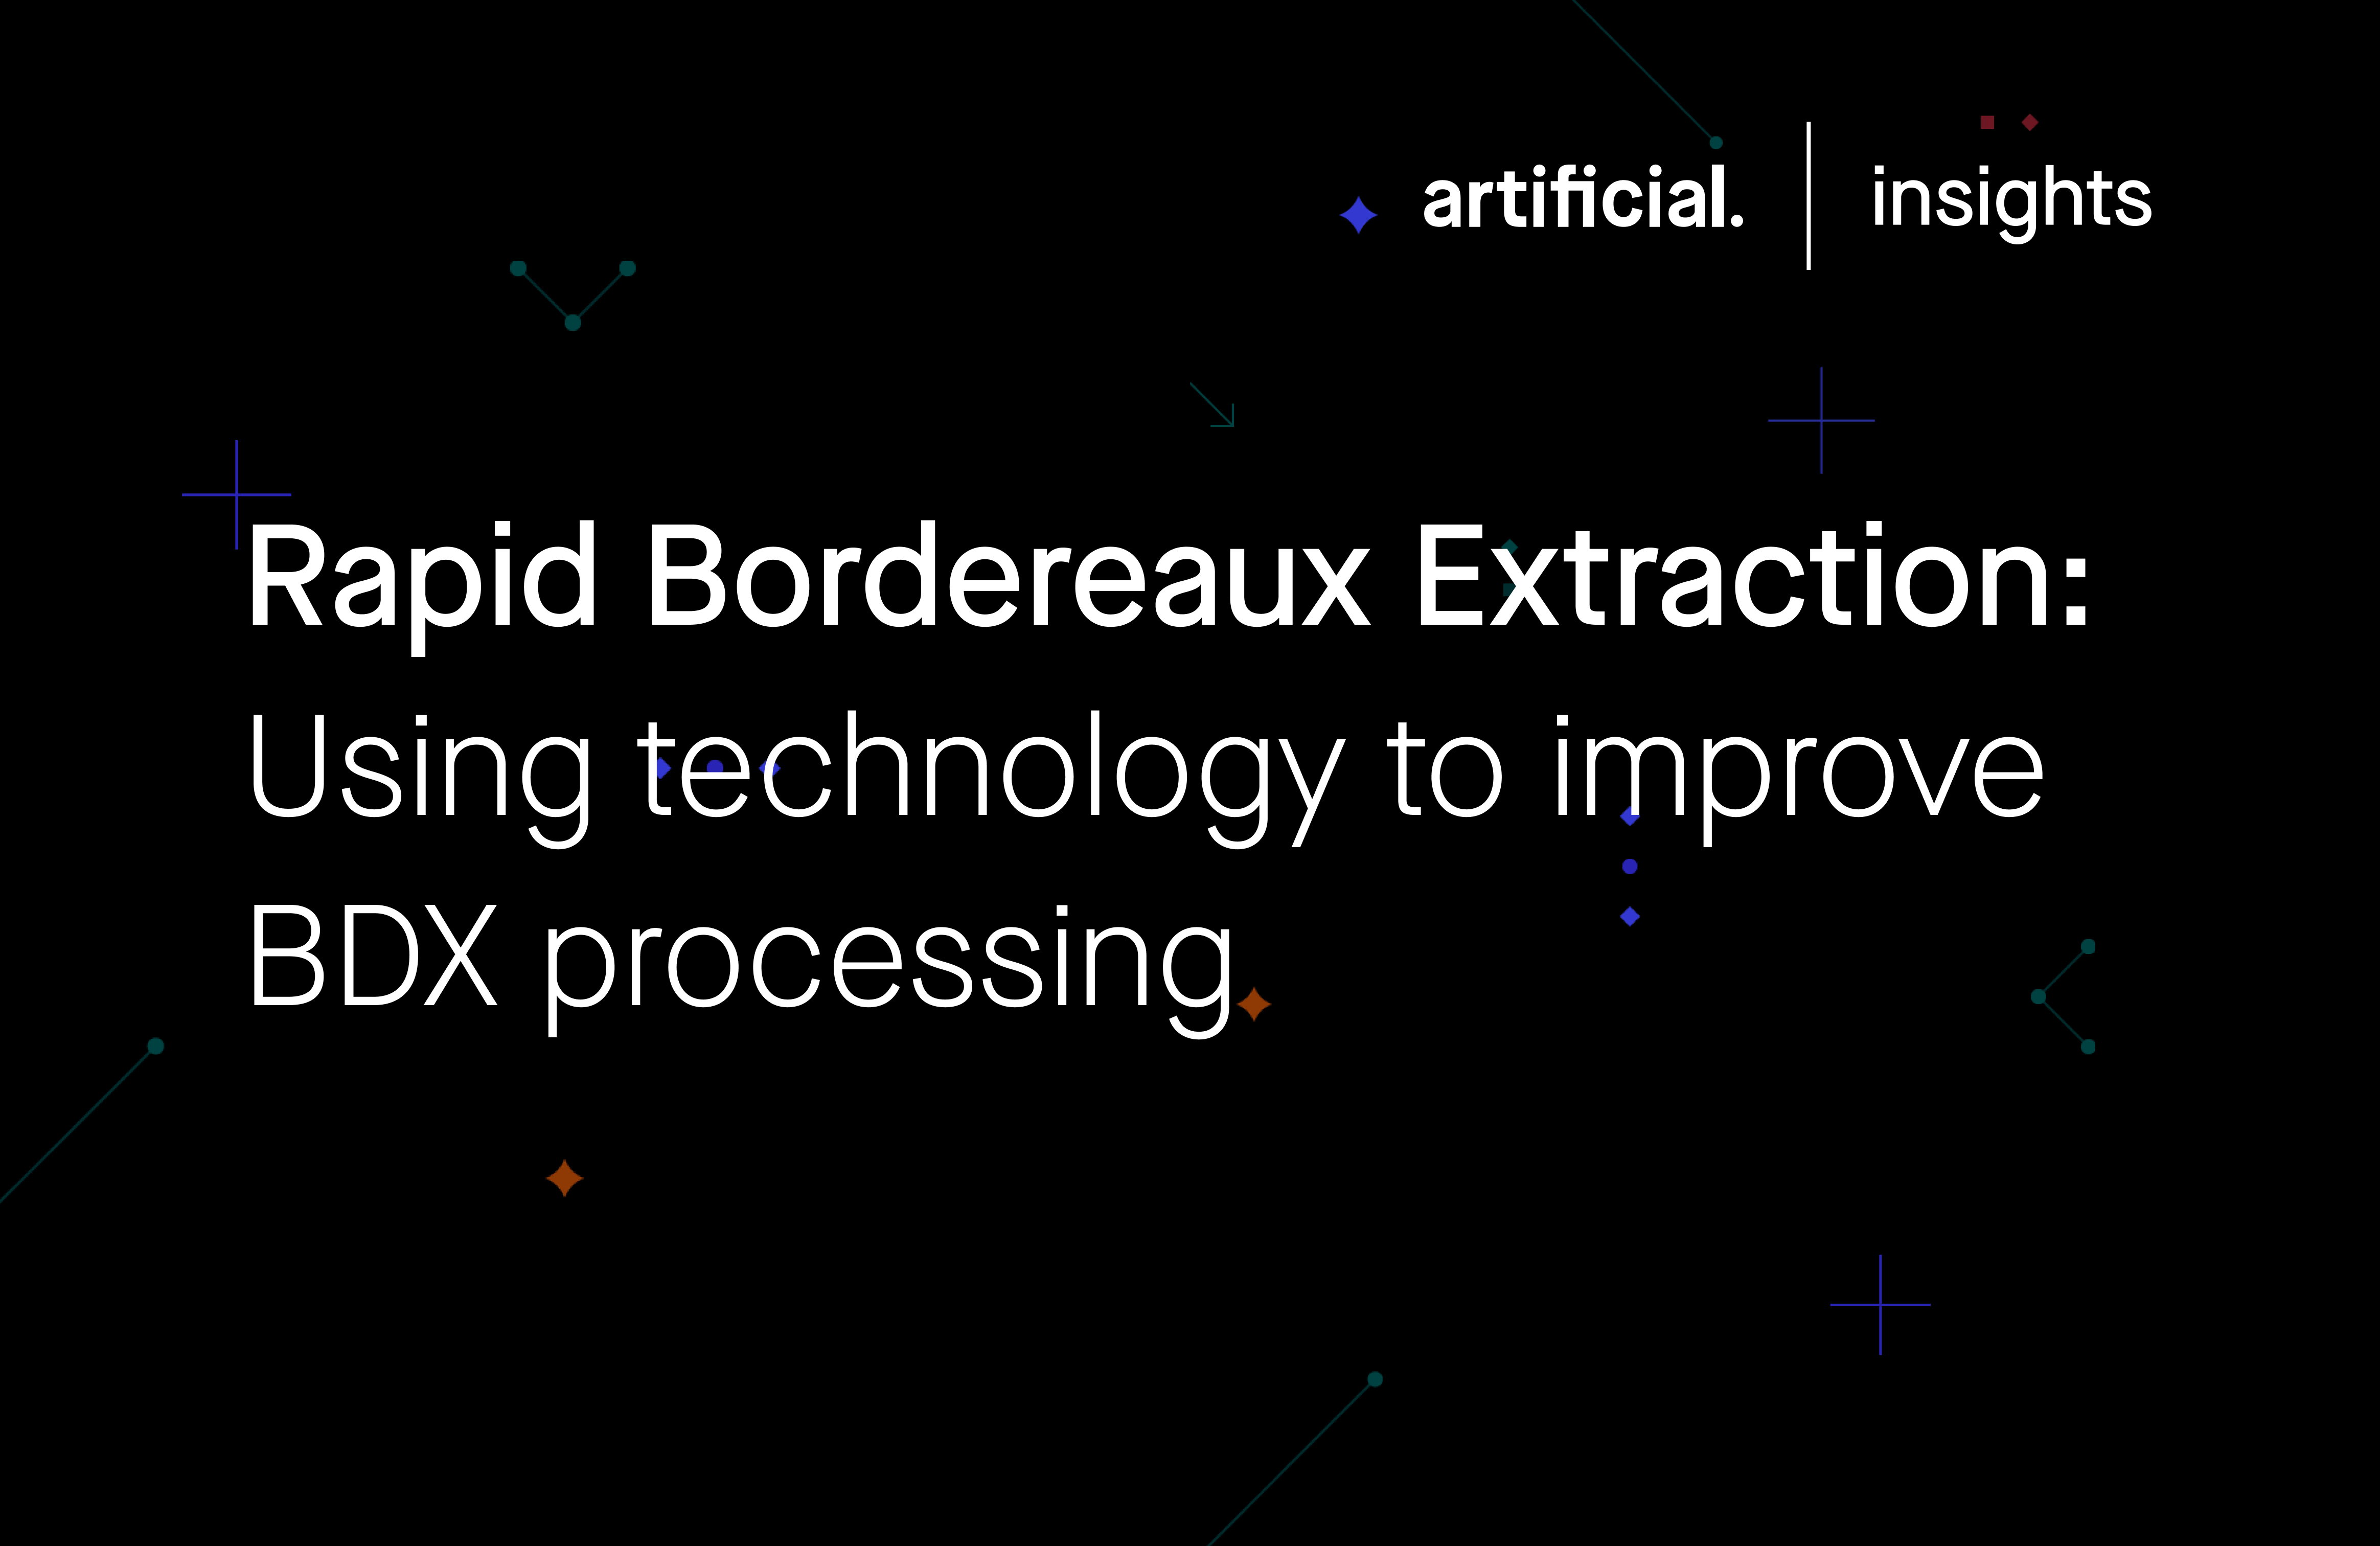 Rapid Bordereaux Extraction: using technology to improve BDX processing